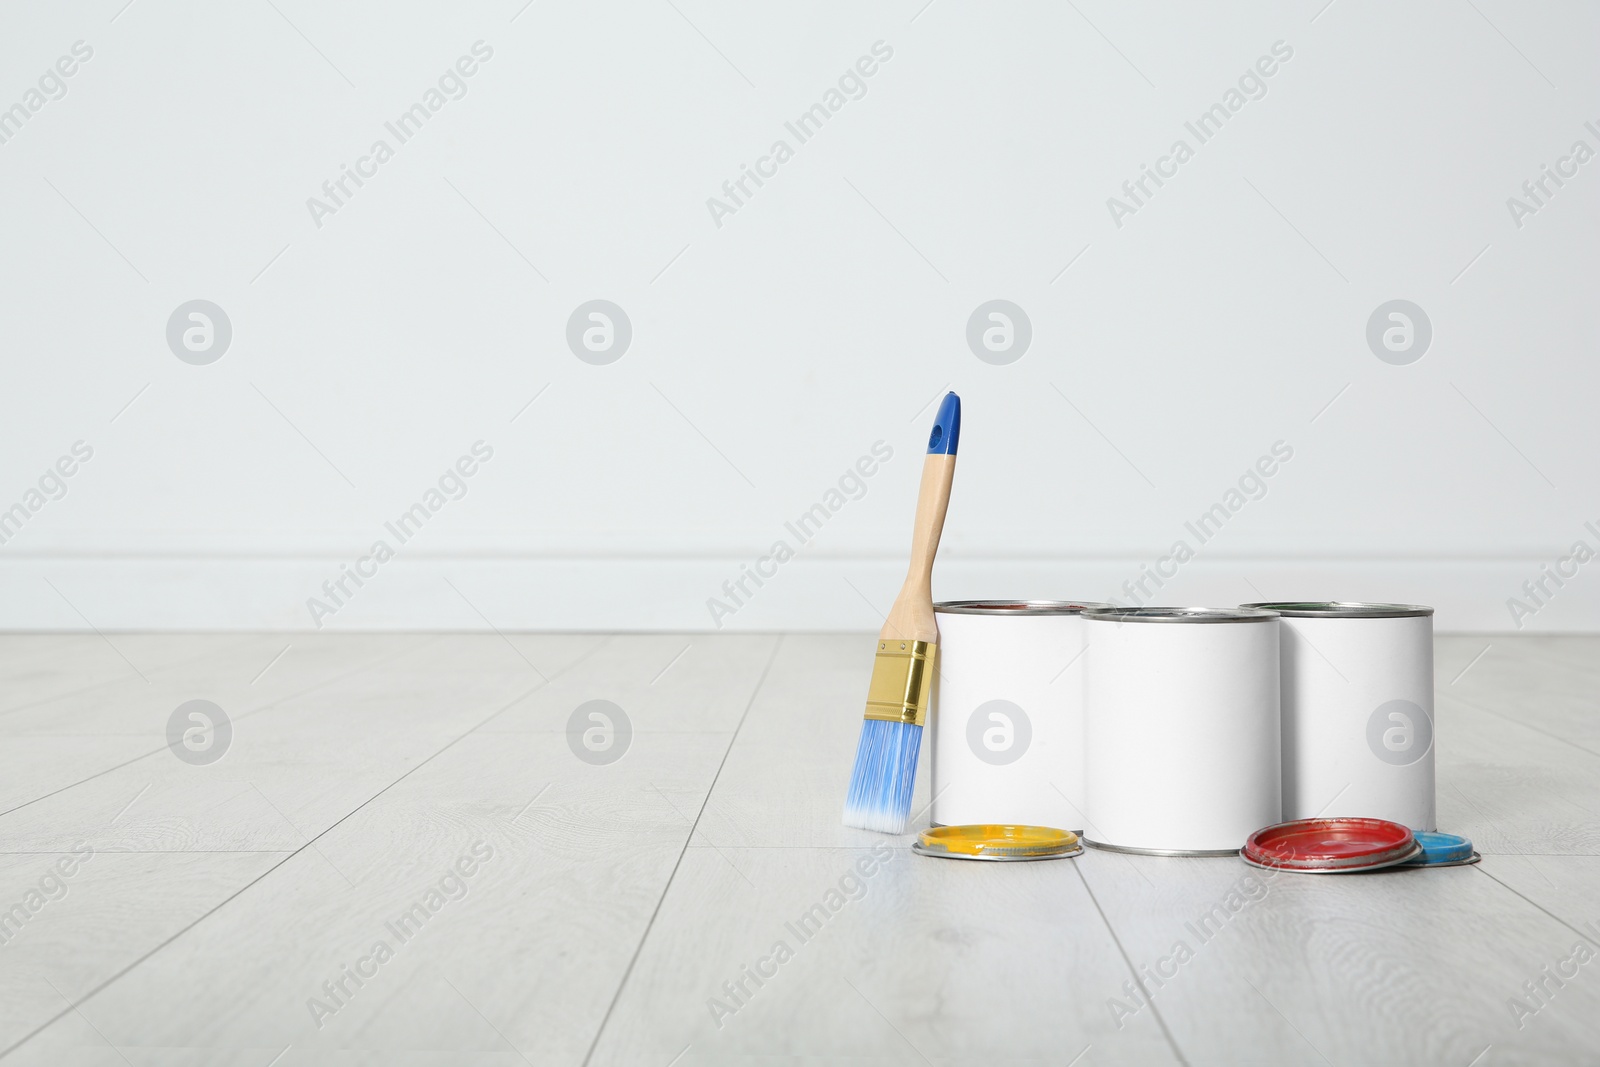 Photo of Cans of paint and brush on wooden floor indoors. Space for text